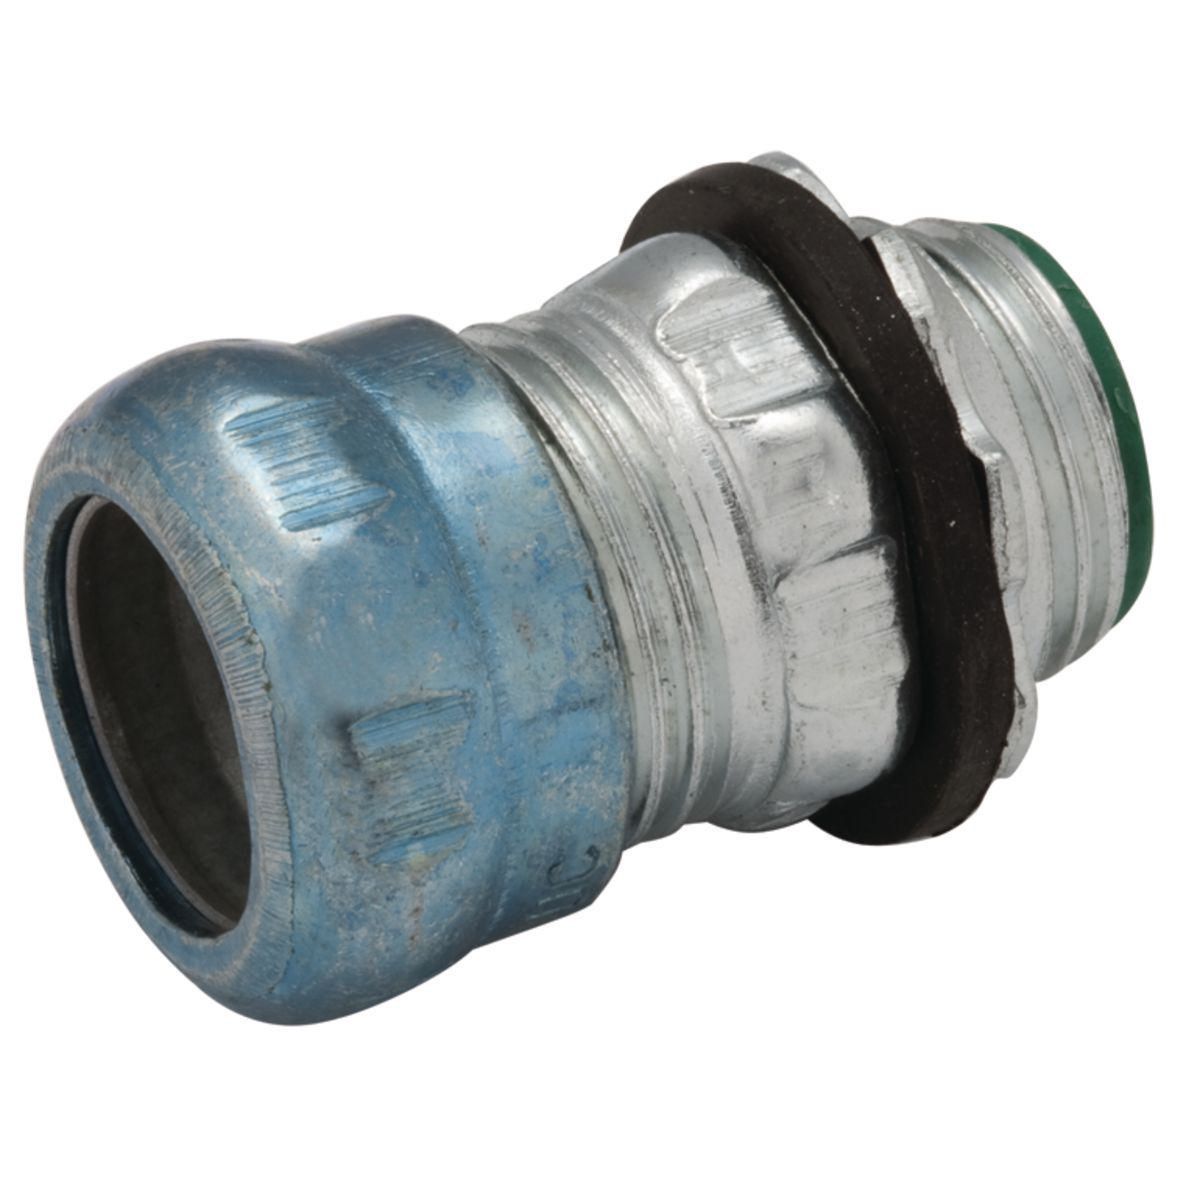 Compression Insulated Connectors, Raintight Steel, 3/4 In. Trade Size